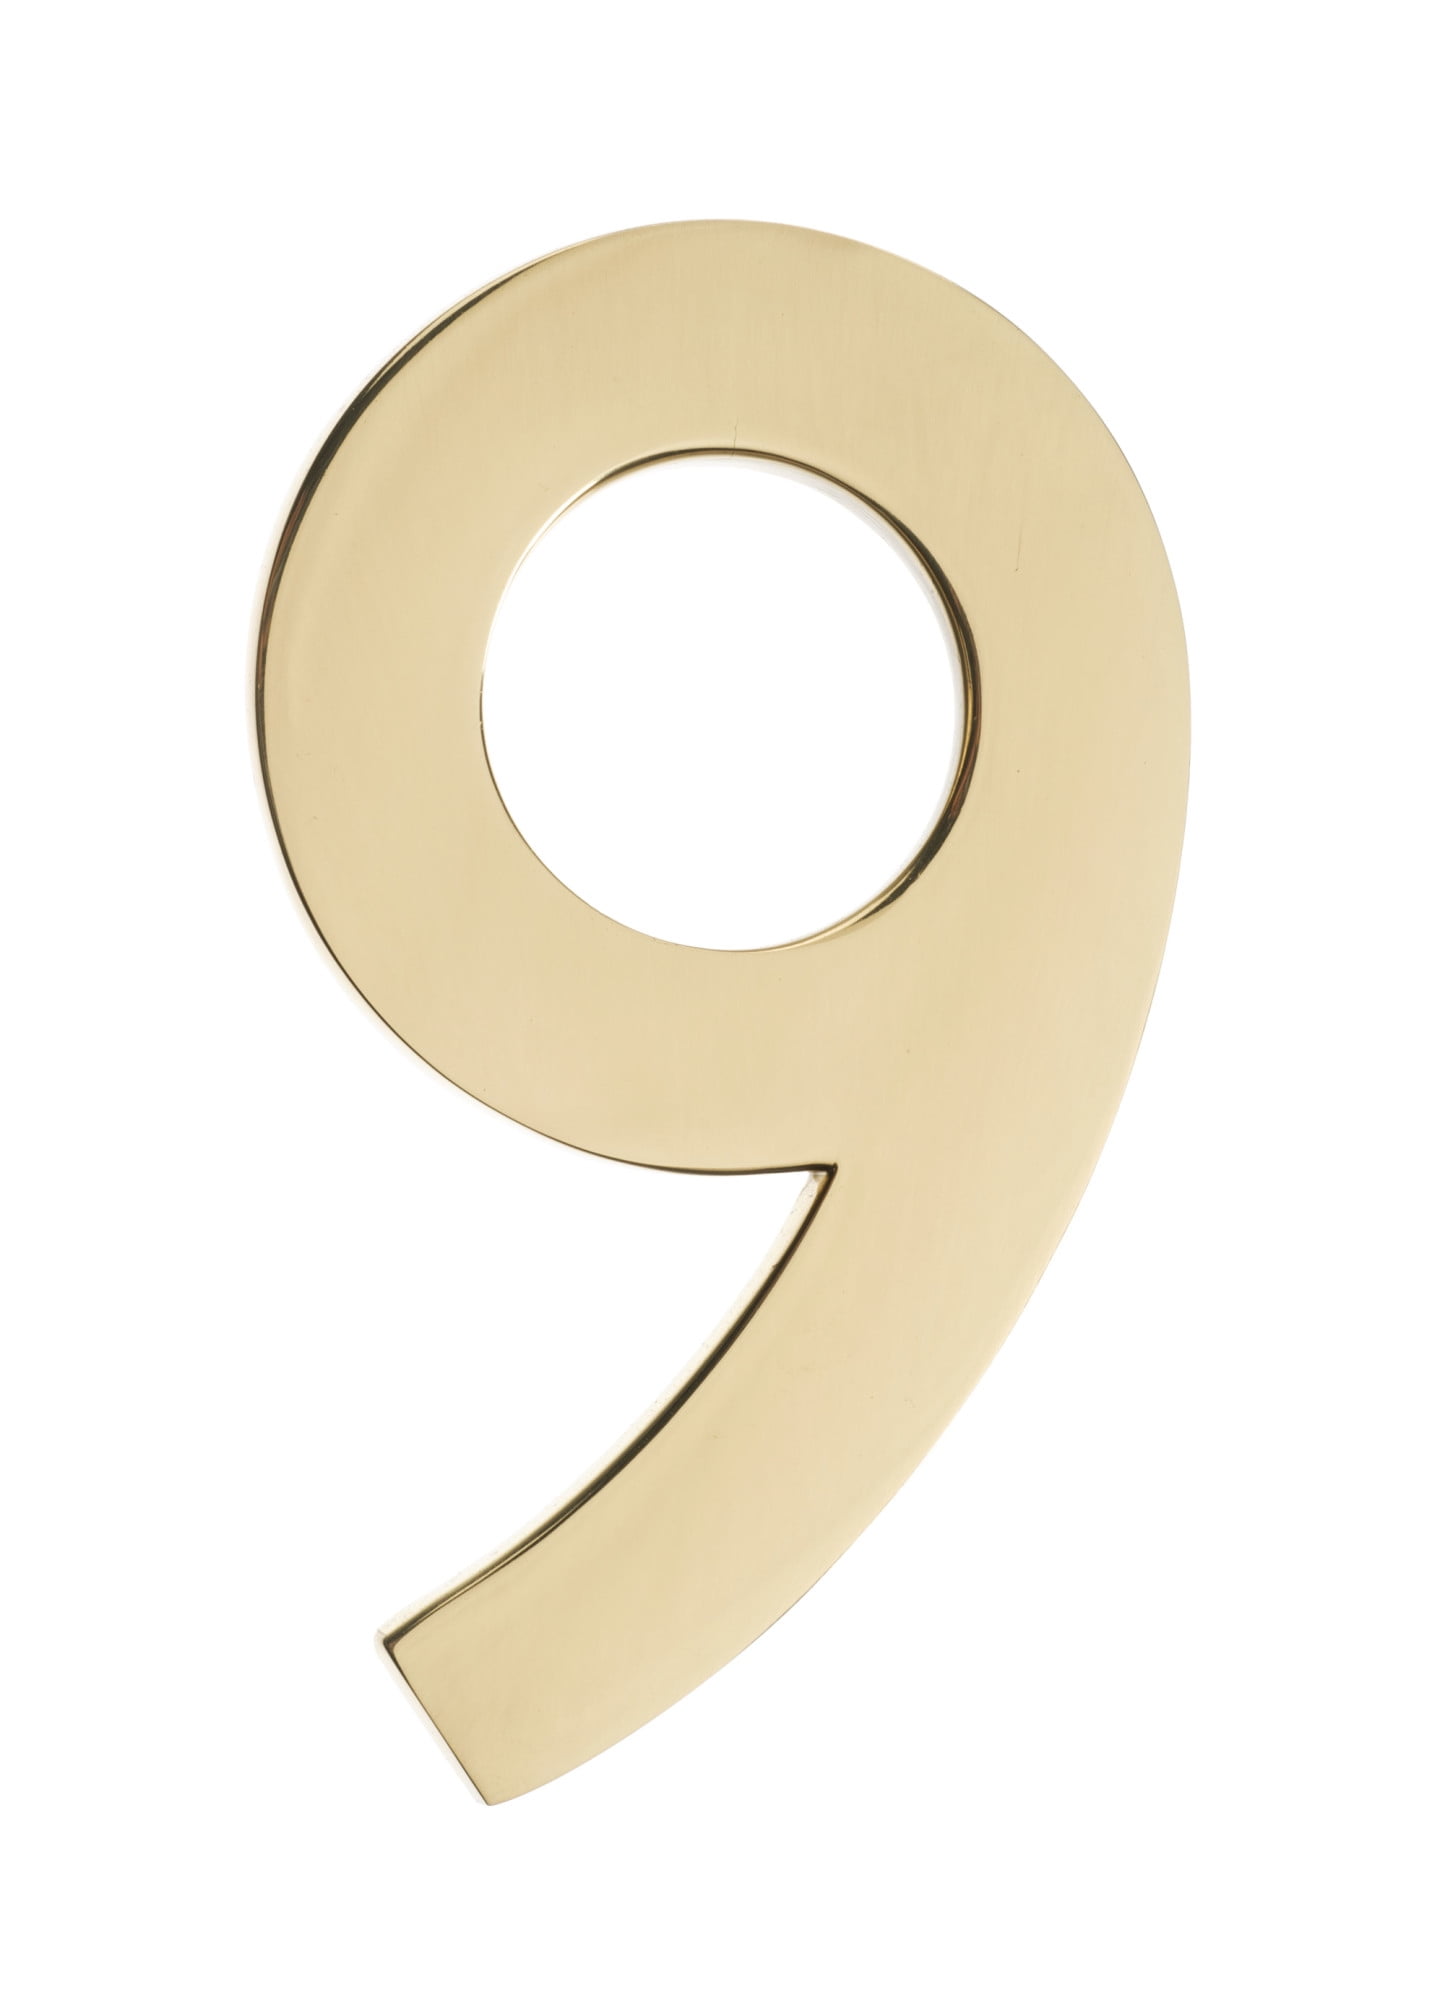 Floating House Number 9, Polished Brass - 4 In.